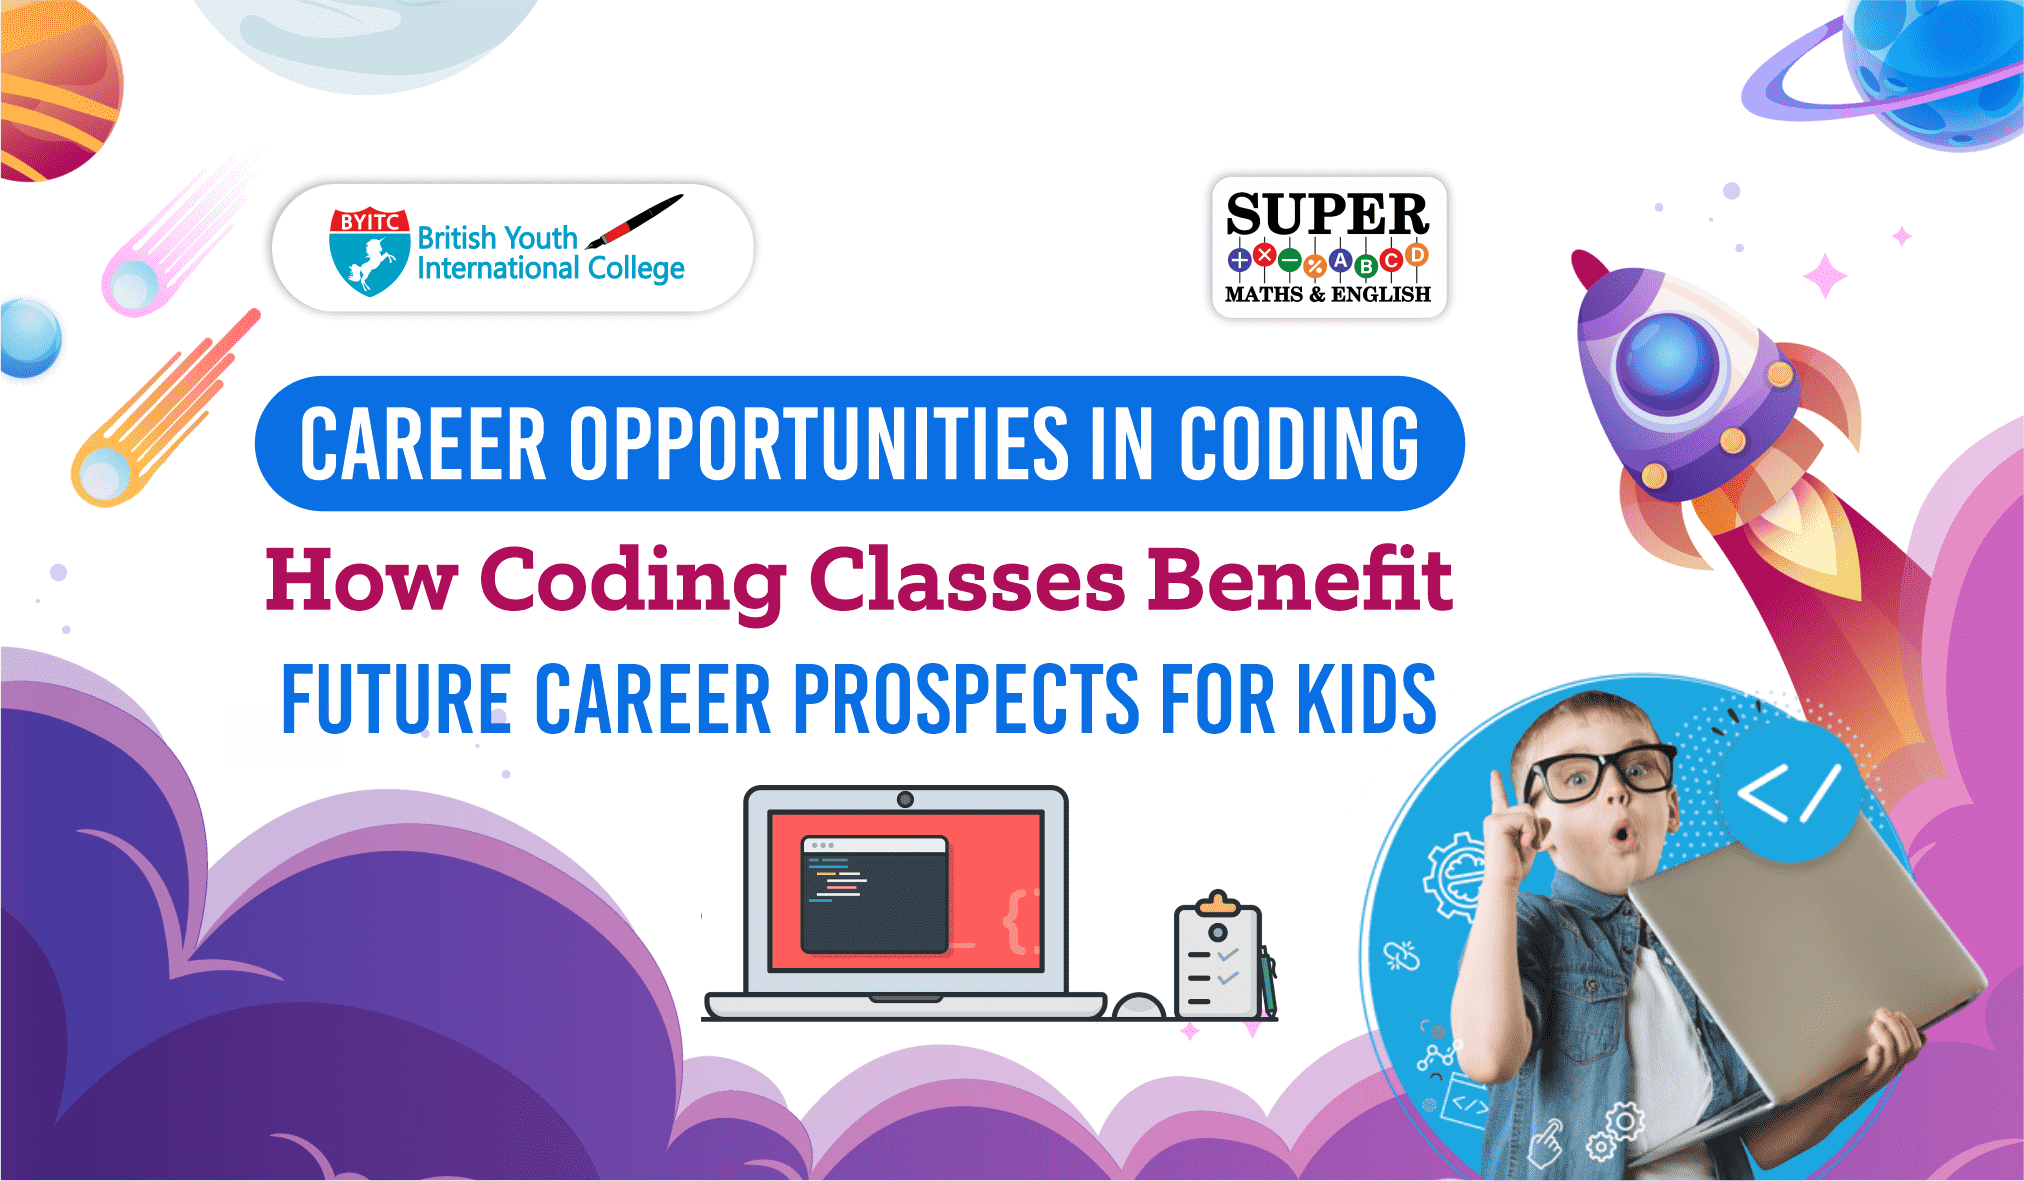 Career Opportunities in Coding: How Coding Classes Benefit Future Career Prospects for Kids